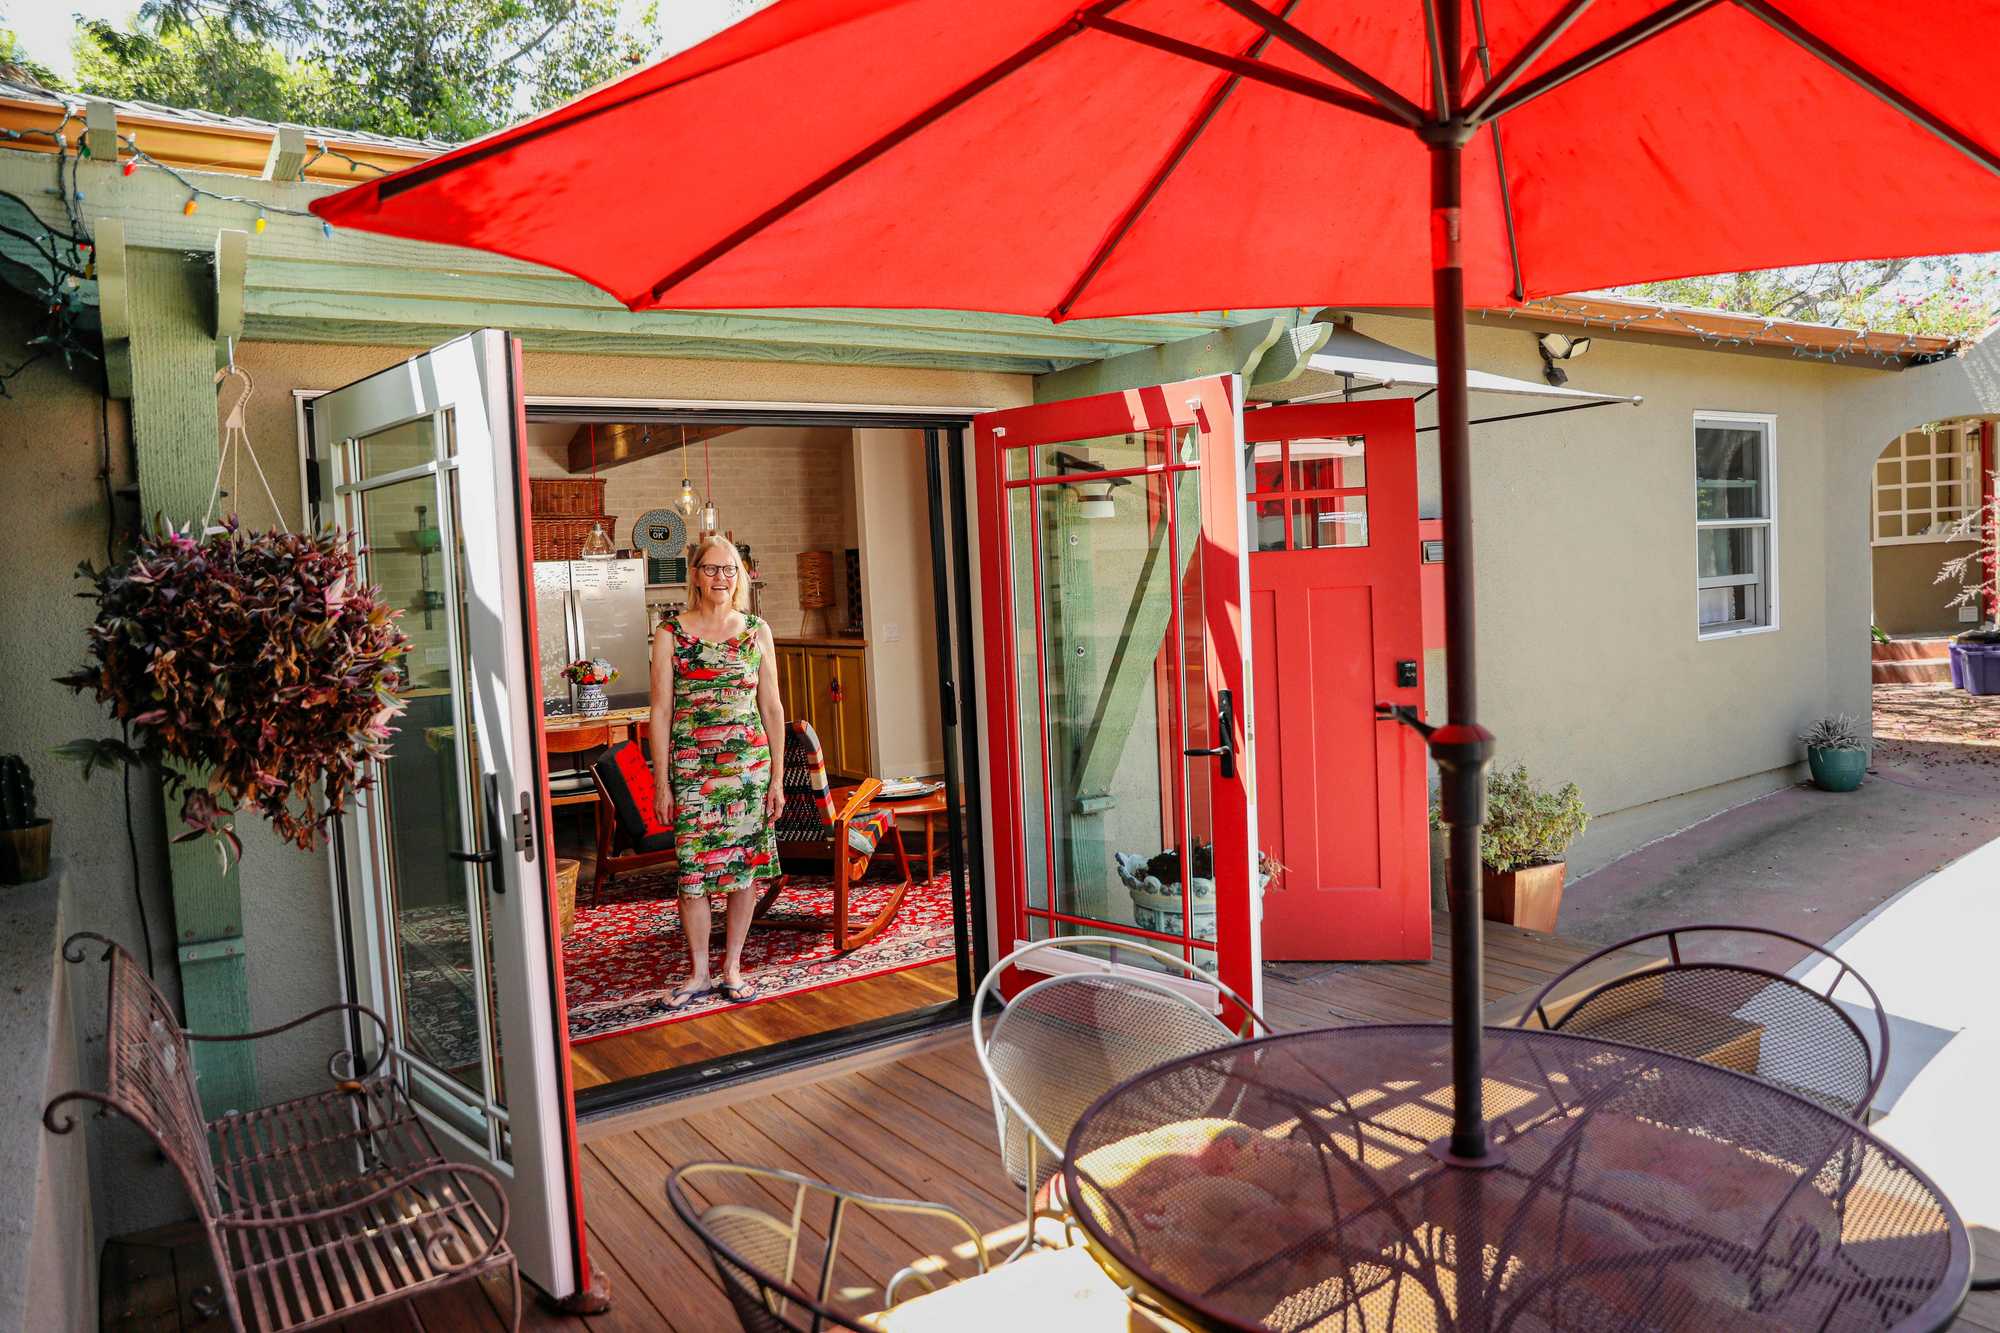 Homeowner Lynn O'Shaughnessy converted her garage in La Mesa into an accessory dwelling unit she can rent out monthly or as an Airbnb. 